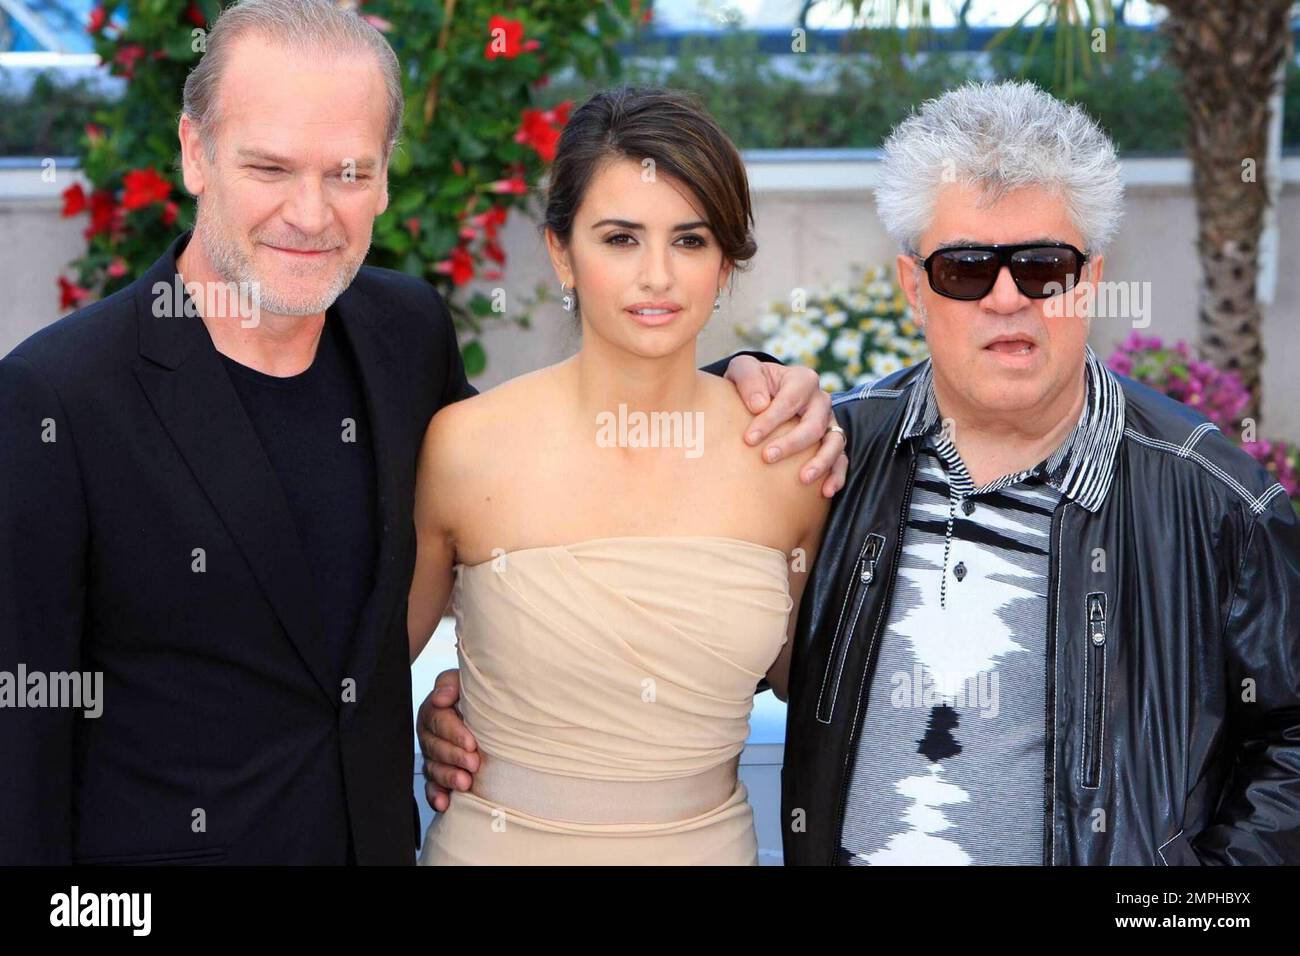 Spanish Beauty Penelope Cruz Poses With Director Pedro Almodovar For The Film Broken Embraces At